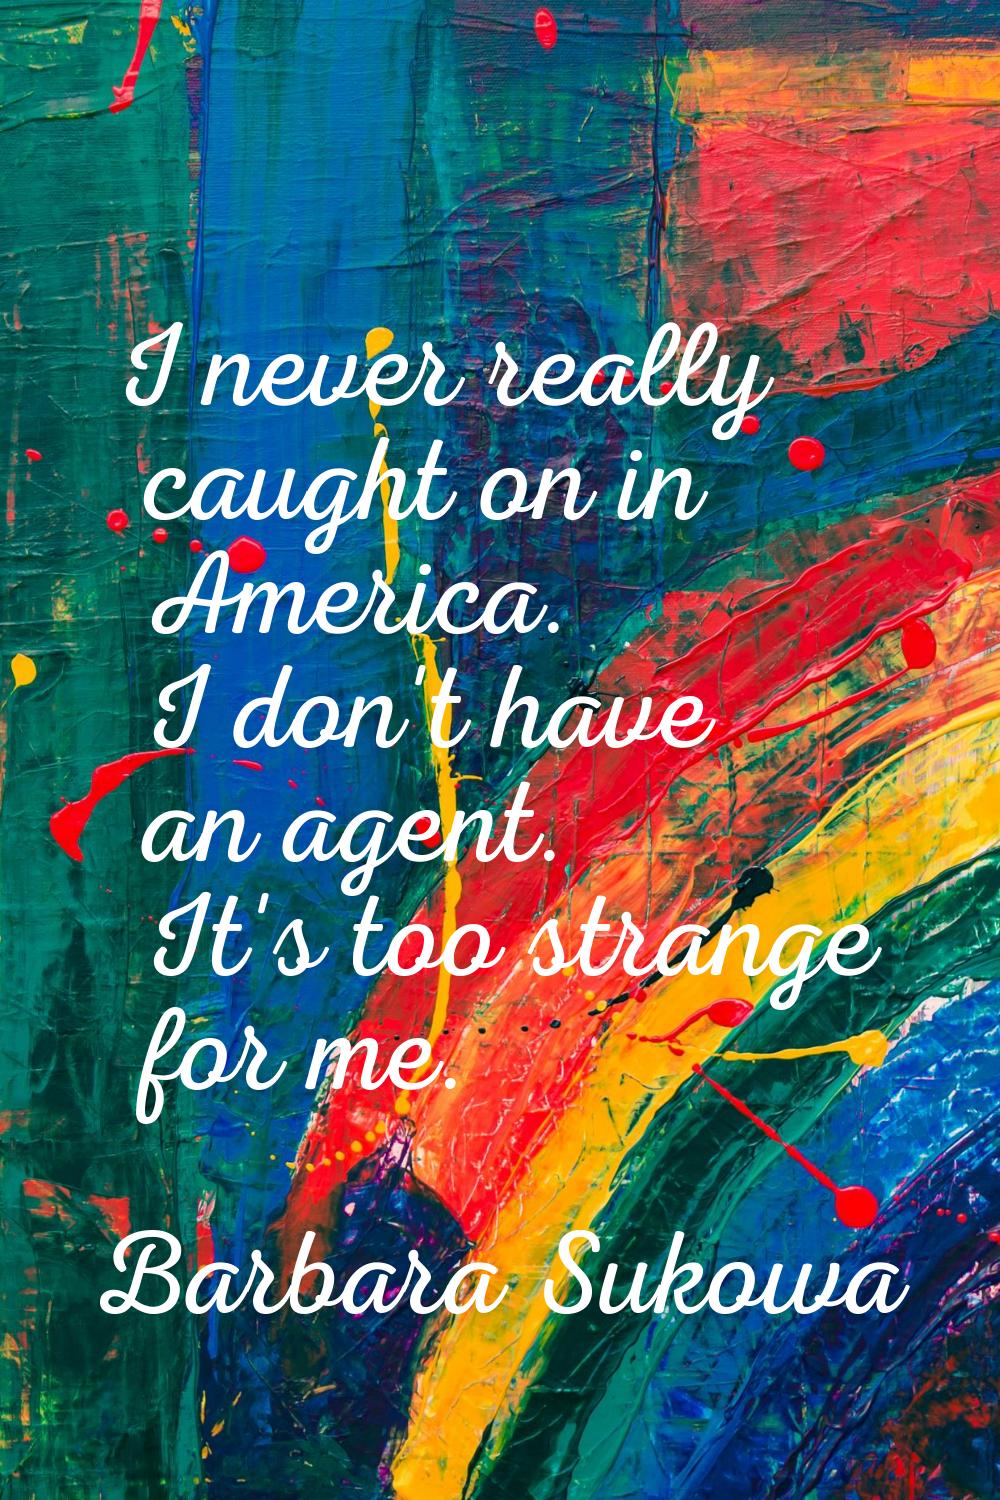 I never really caught on in America. I don't have an agent. It's too strange for me.